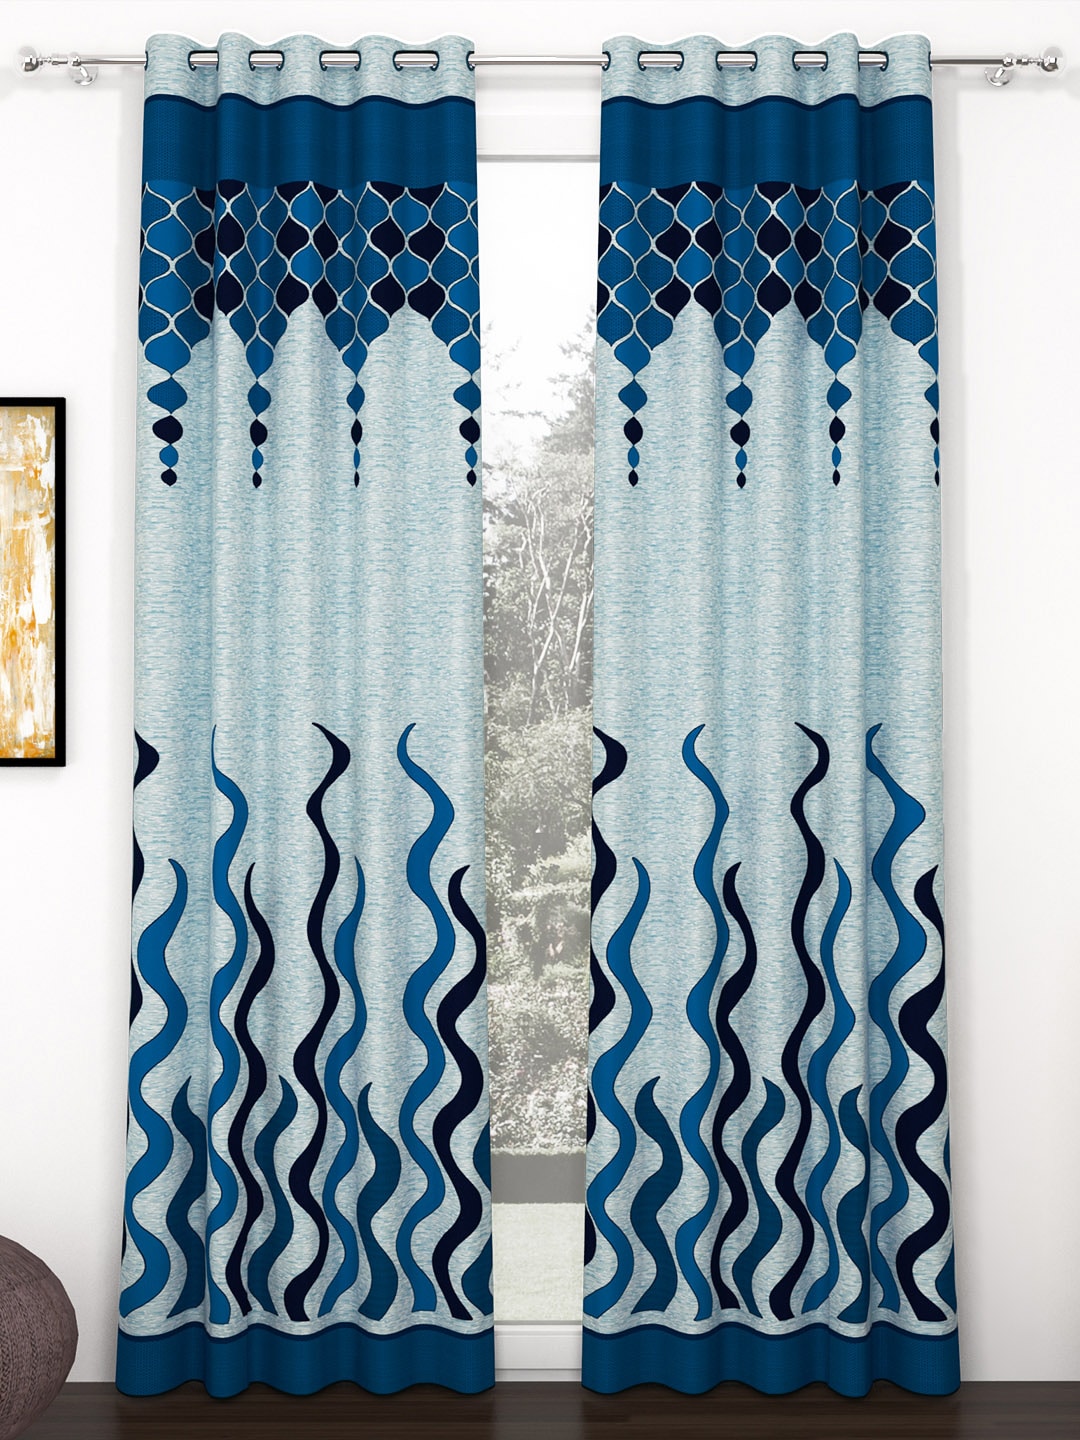 Story@home Blue & Grey 2-Pieces Geometric Door Curtains